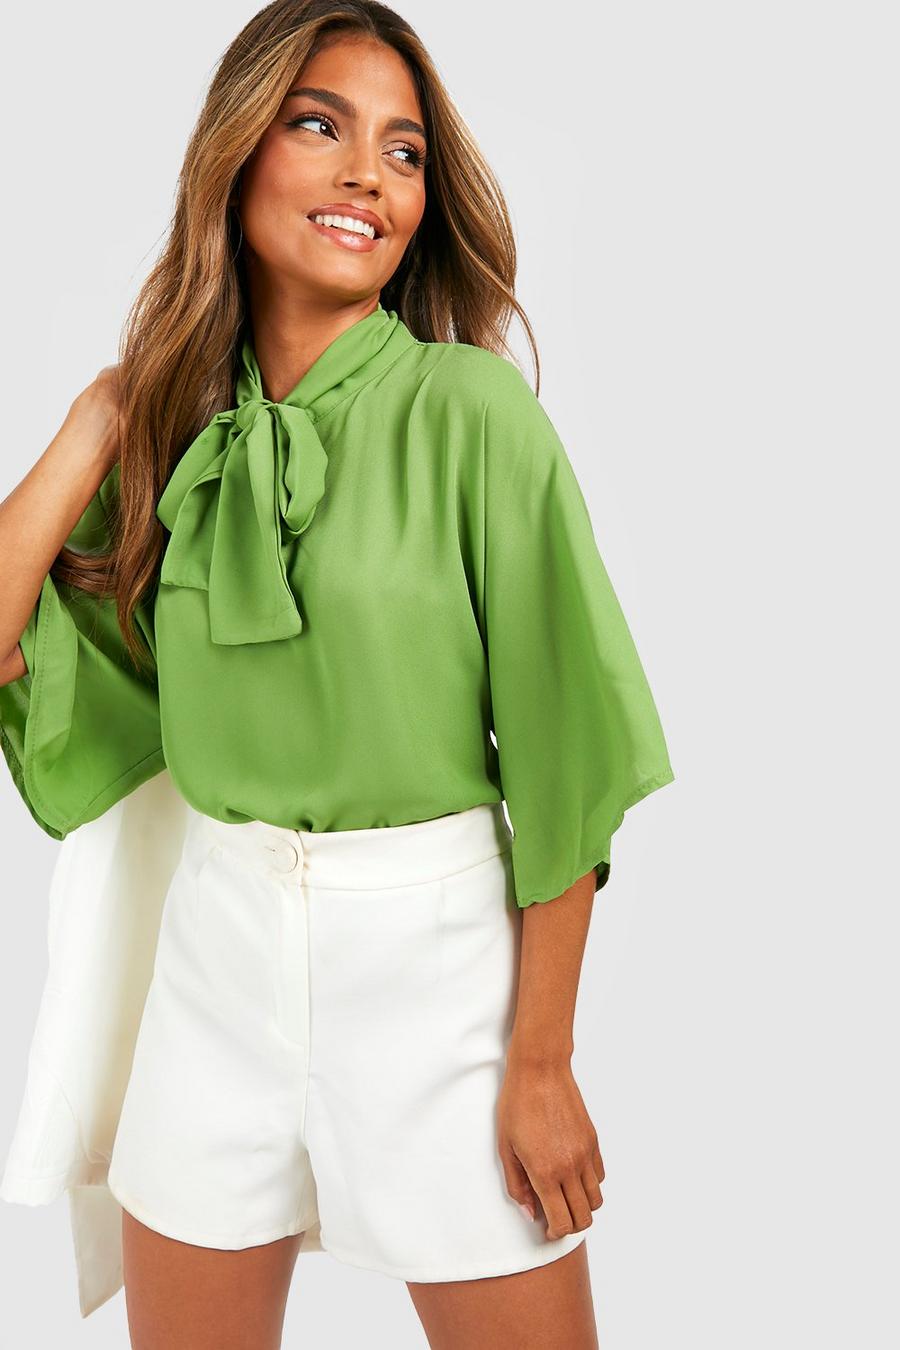 Soft lime Woven Tie Neck Floaty Flared Sleeve Blouse